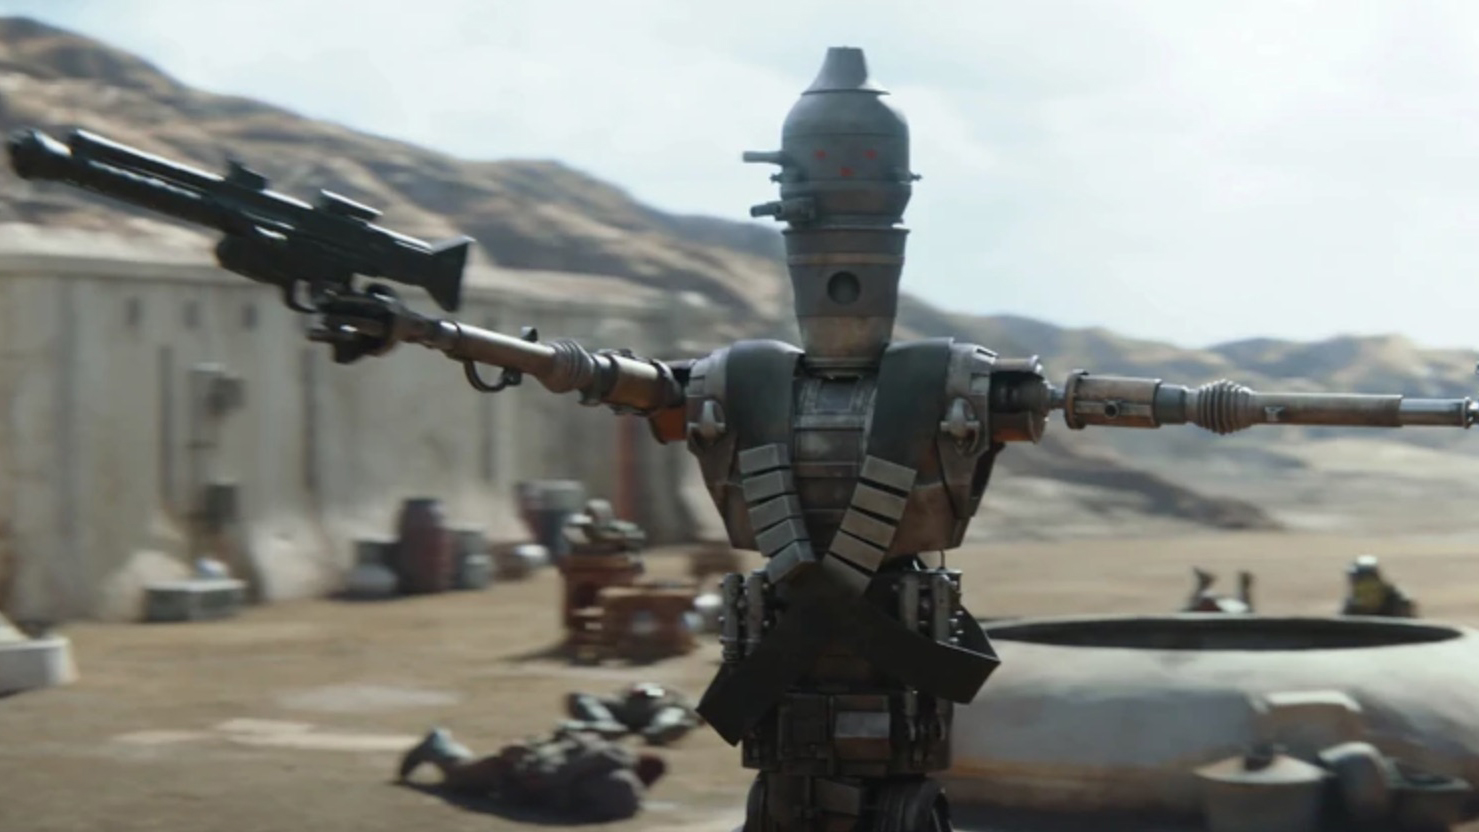 The bounty hunter droid IG-11 from the Star Wars TV show The Mandalorian.